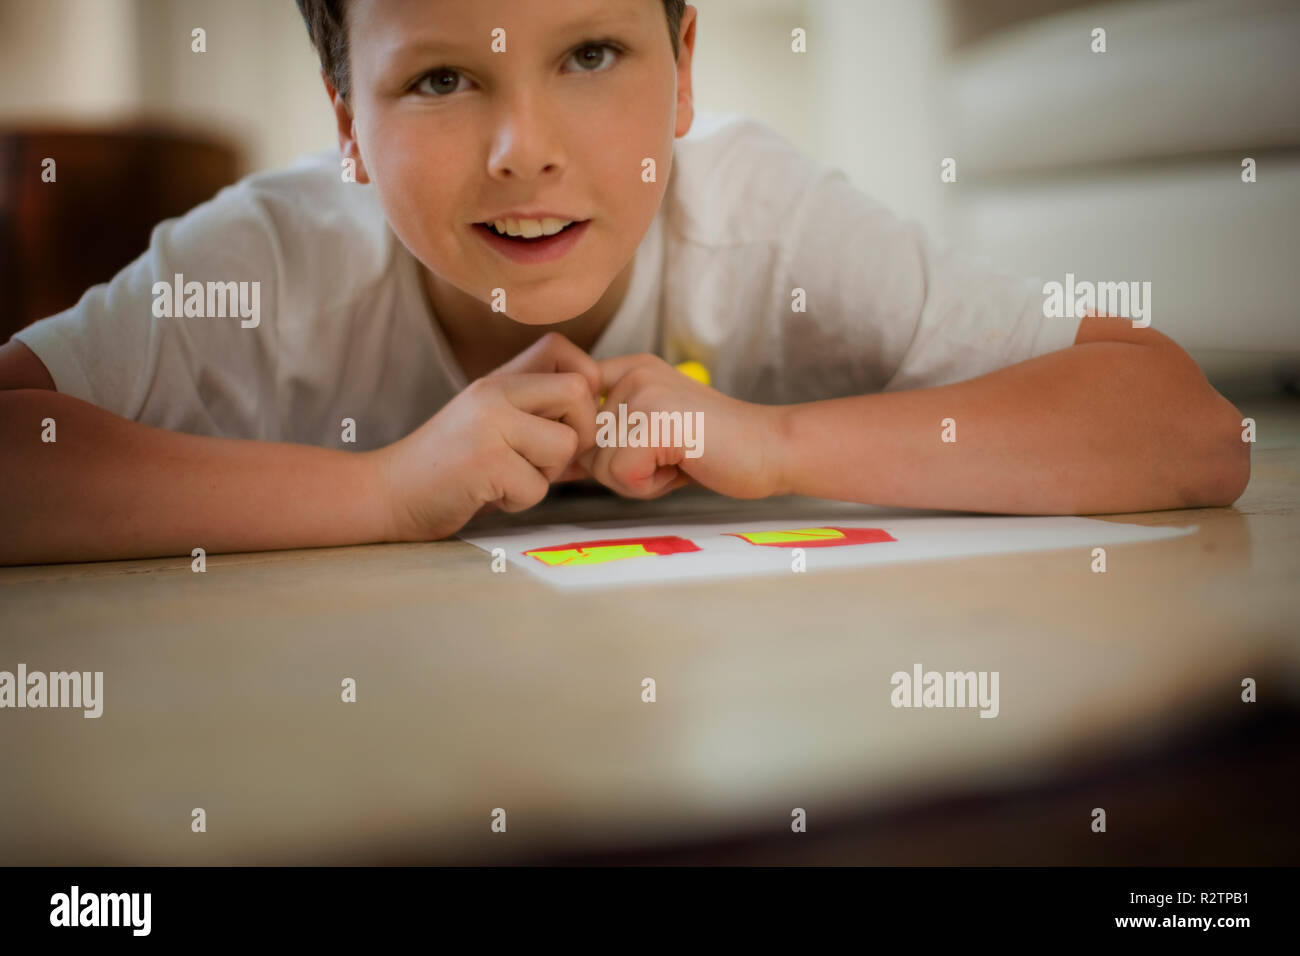 Boy lying down coloring in pictures. Stock Photo